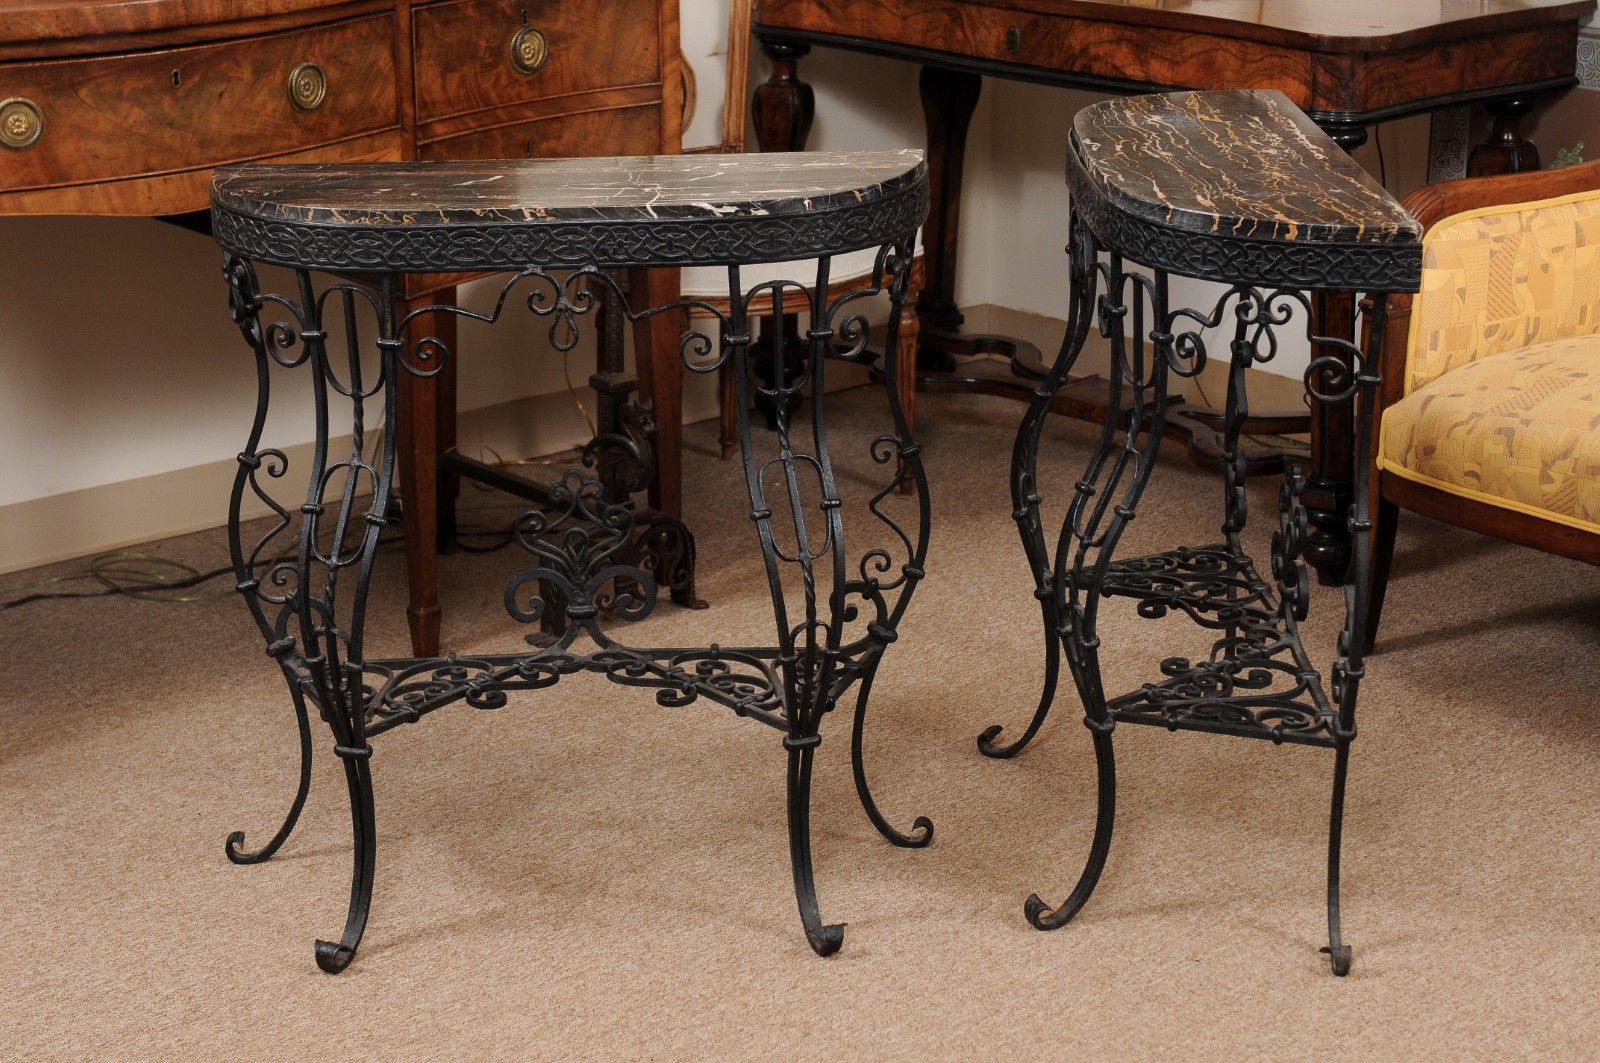 Pair Of Iron Console Tables With Cabriole Legs, Scroll Detail, & Black Throughout Round Iron Console Tables (View 3 of 20)